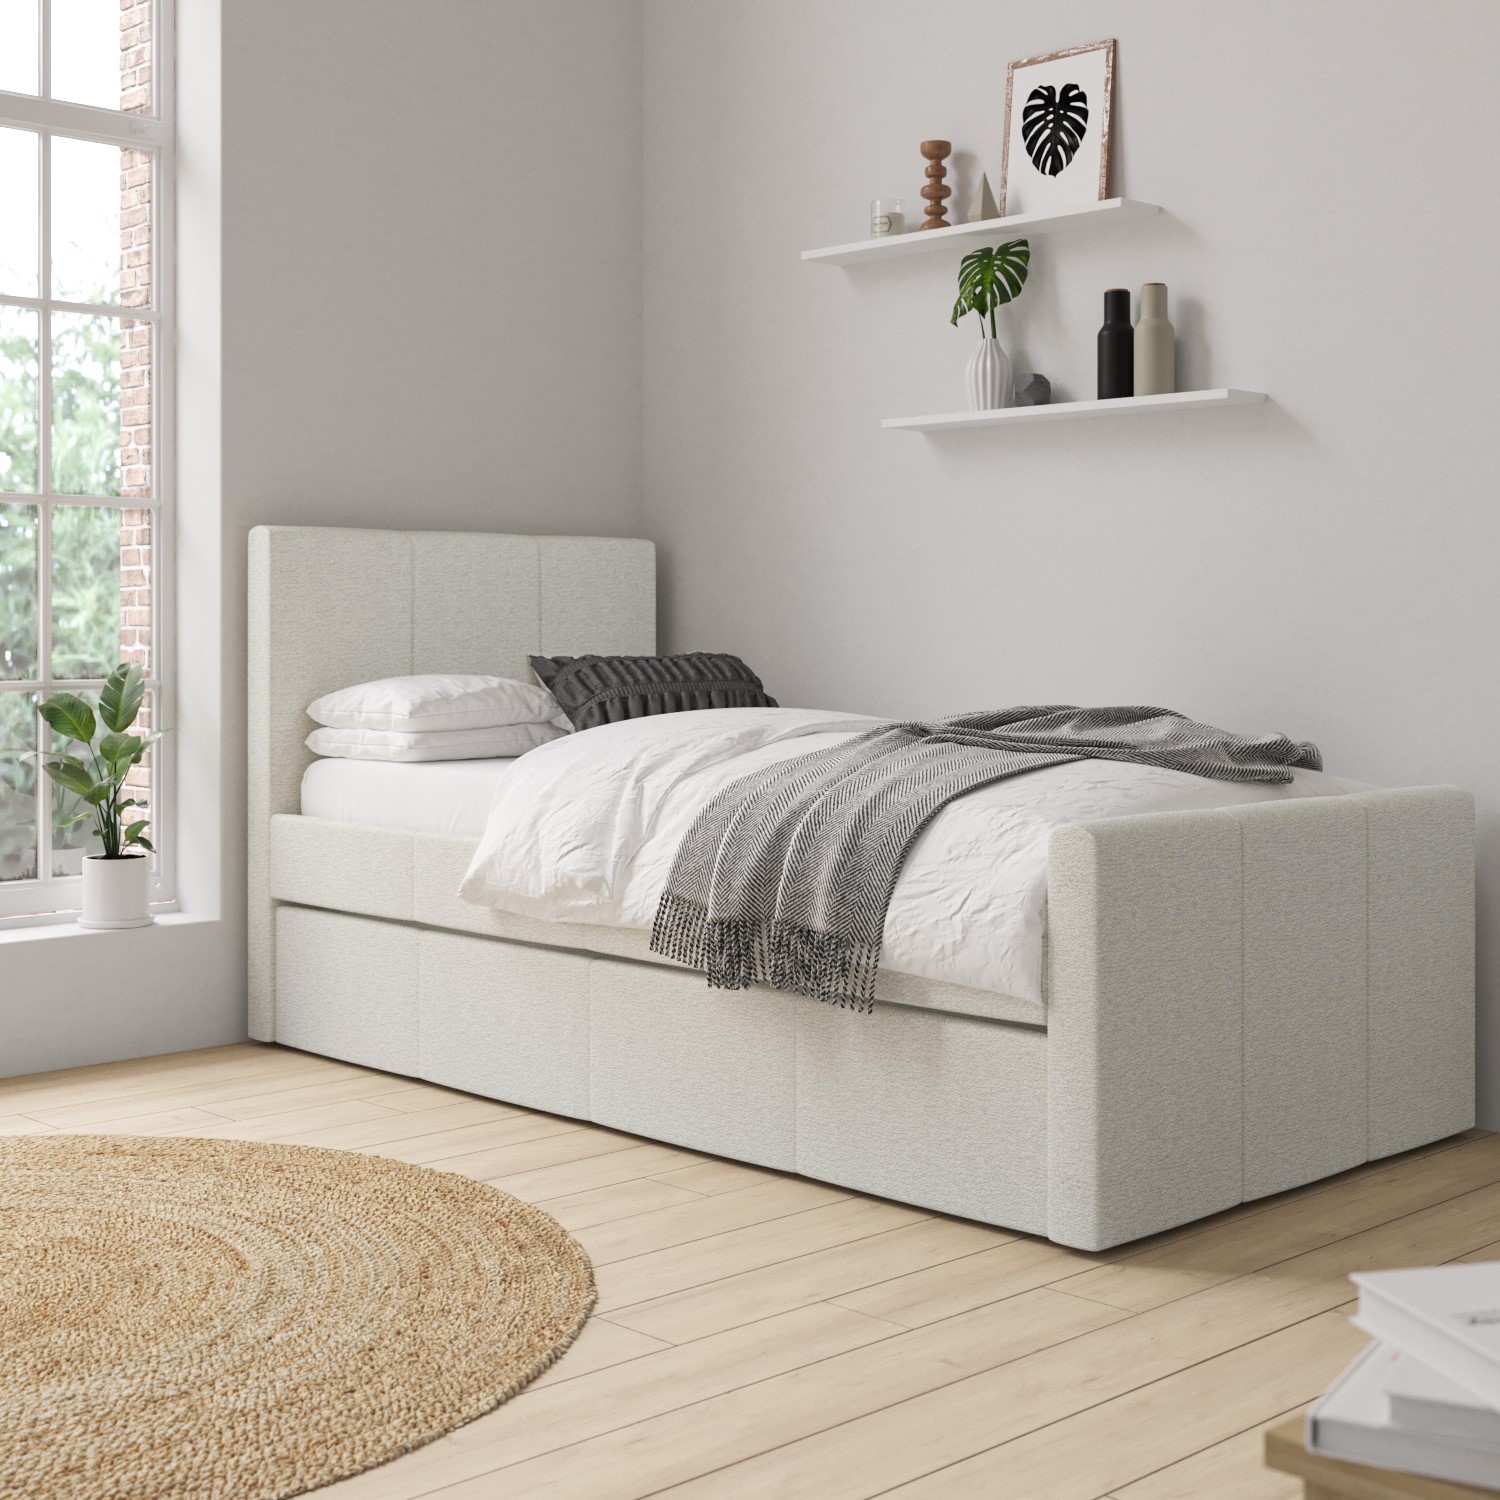 Read more about Single guest bed with trundle in cream fabric layla